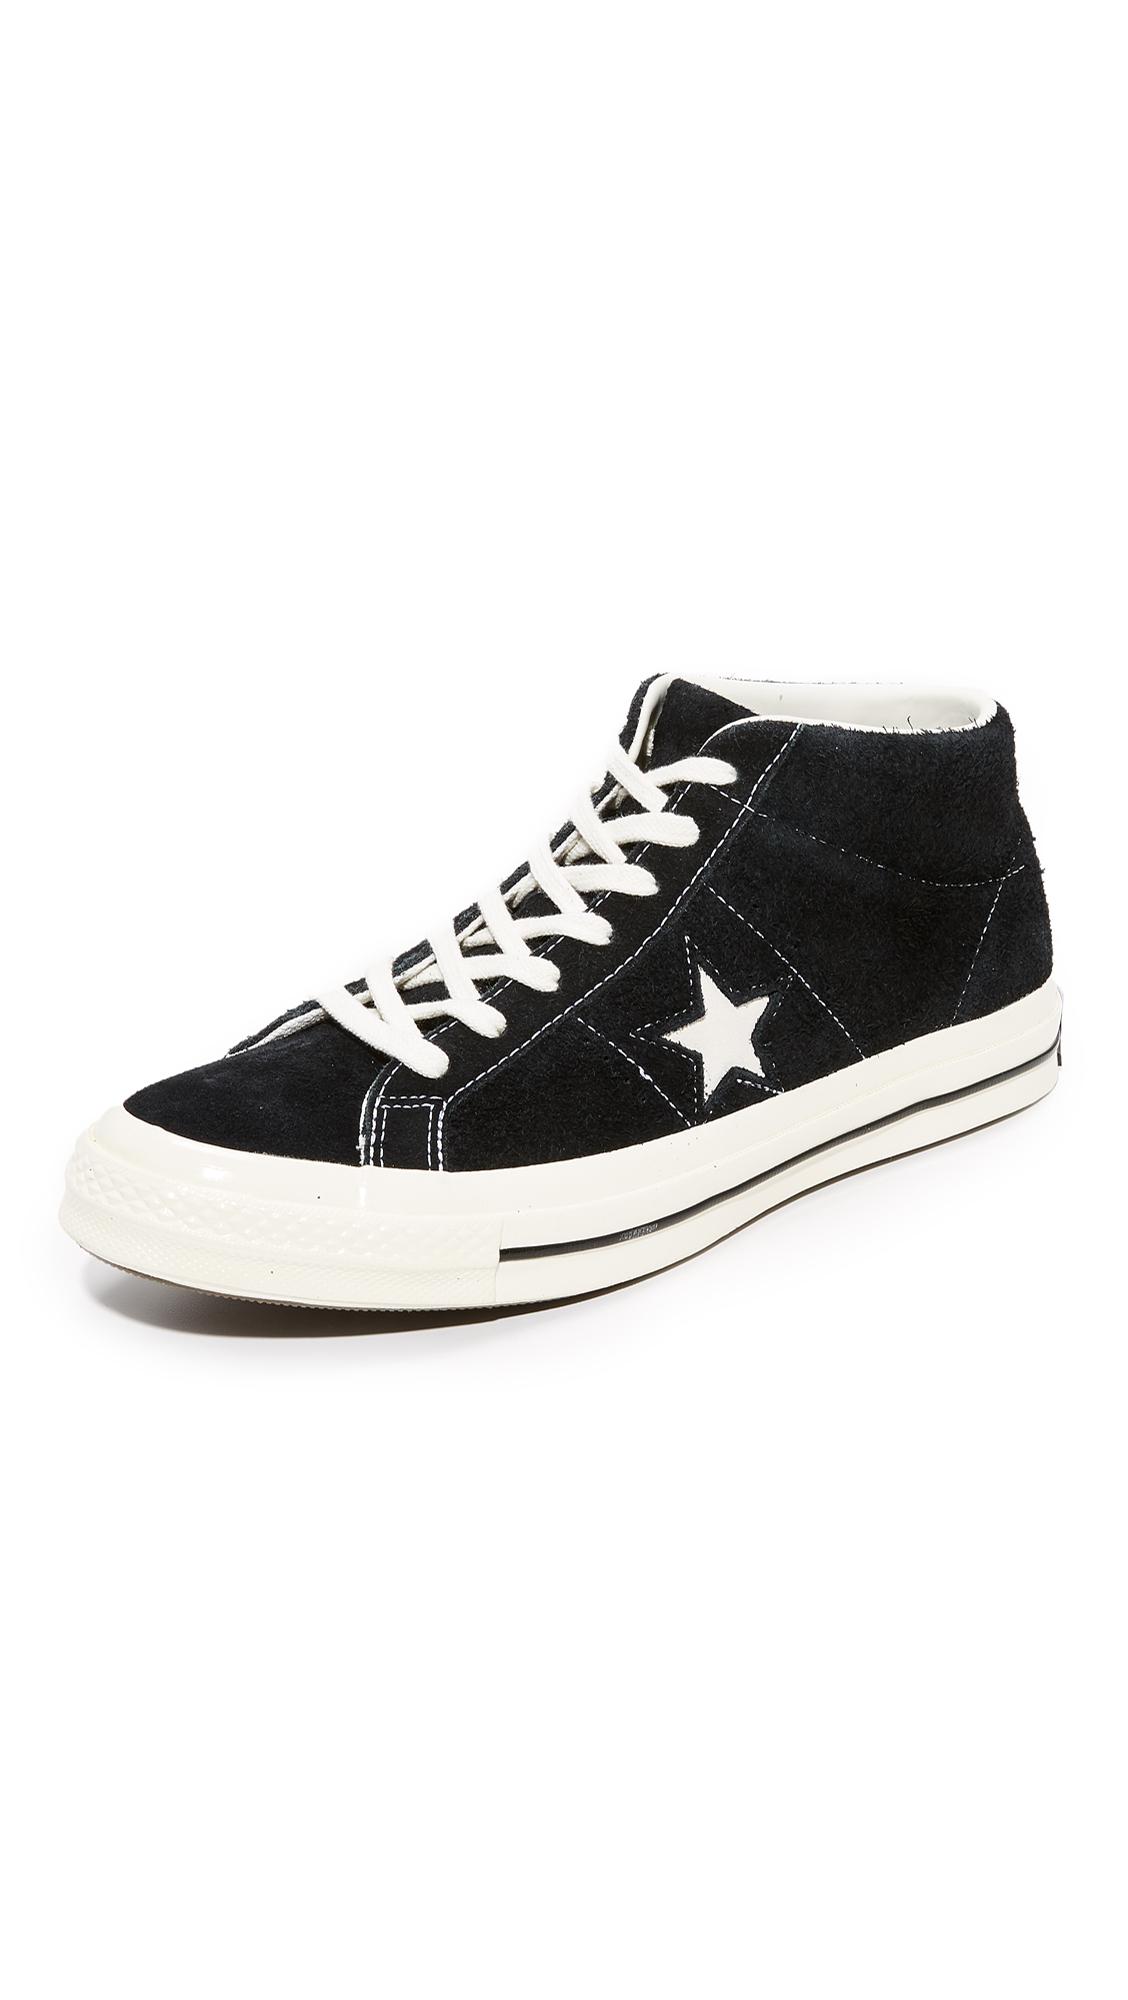 Converse One Star 74 Suede Mid Top Sneakers in Black for Men - Lyst